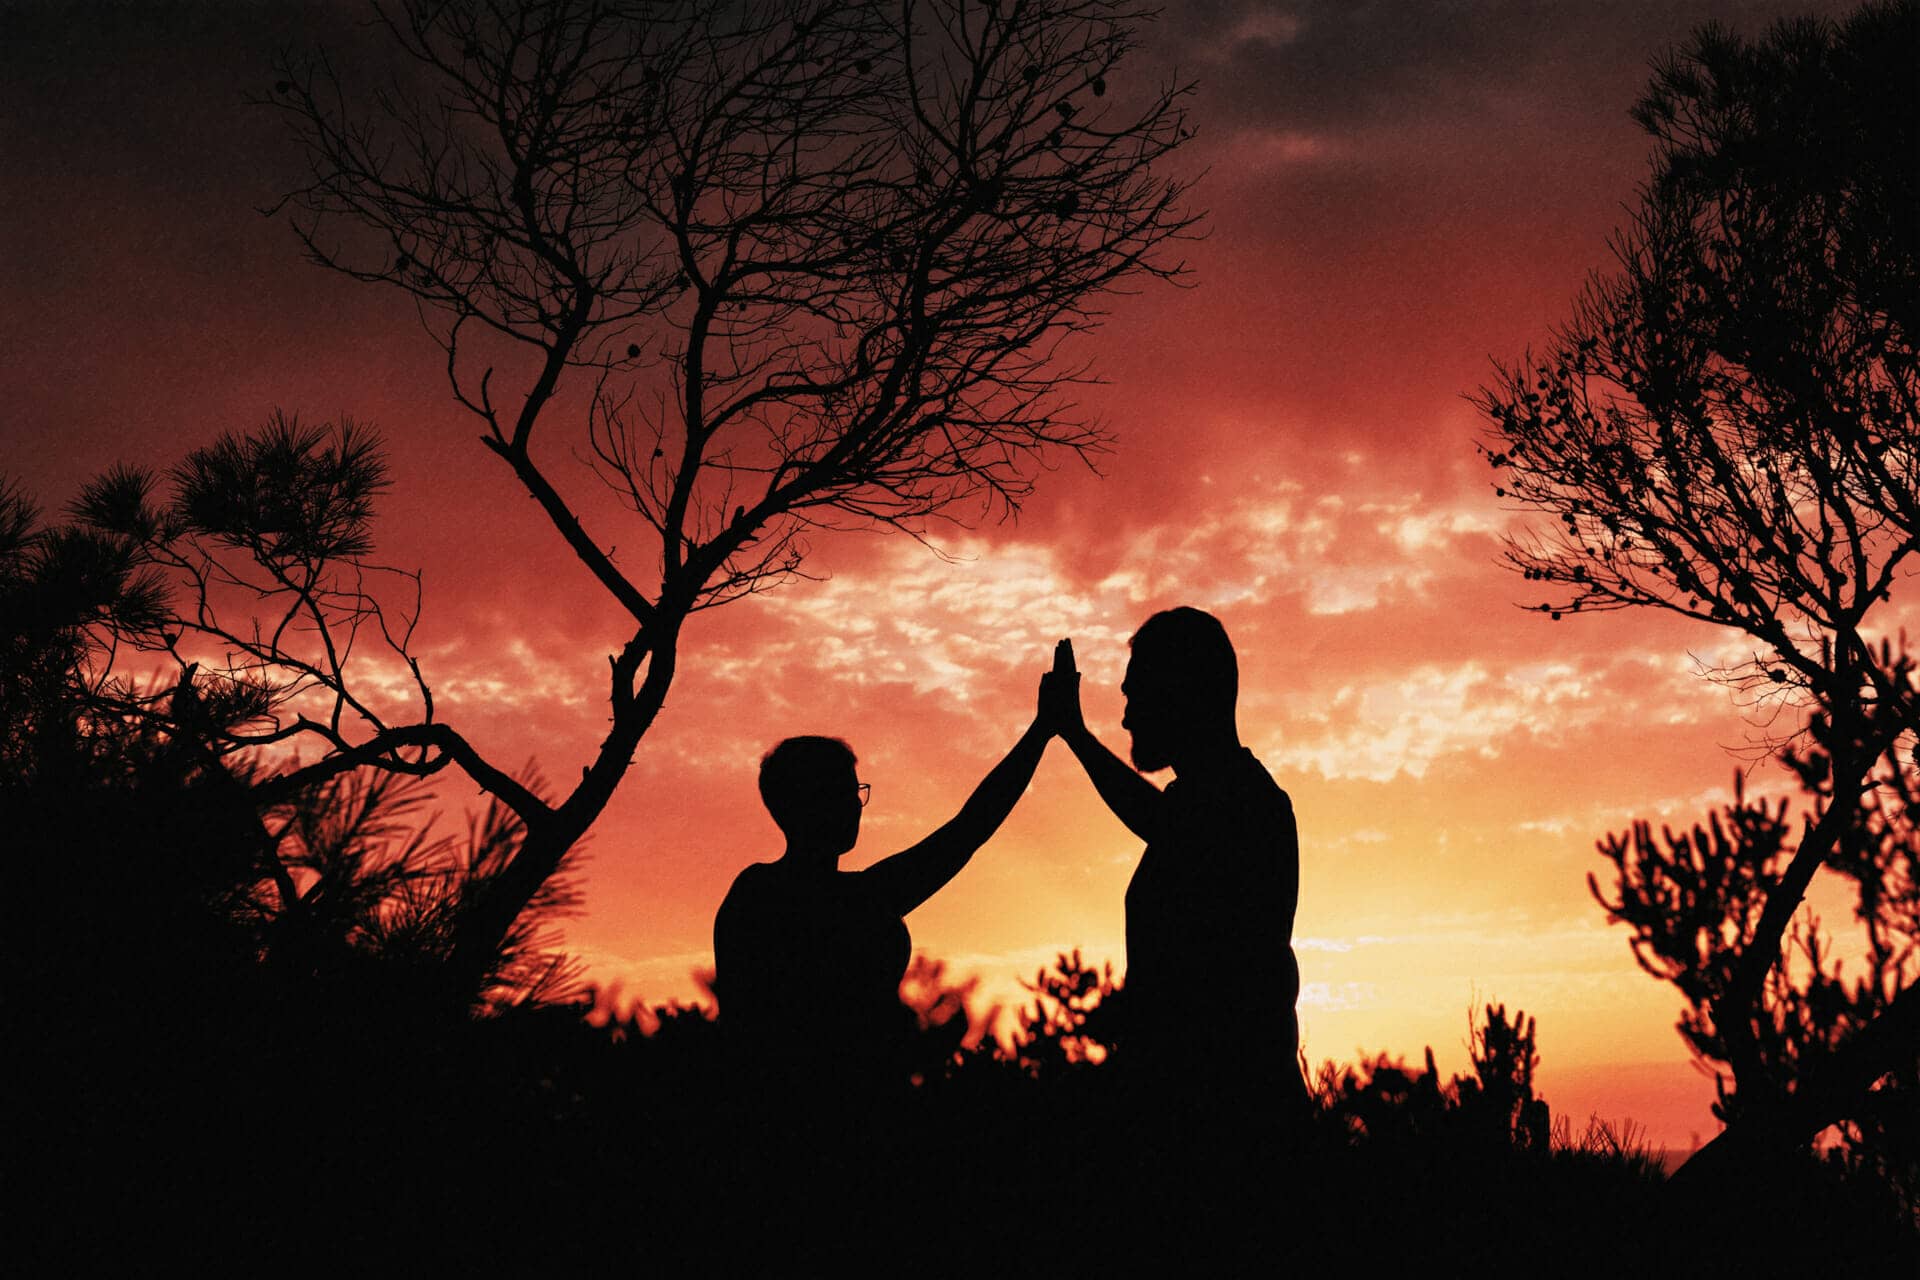 backlit image of couple at sunset posing for photographer in ibiza